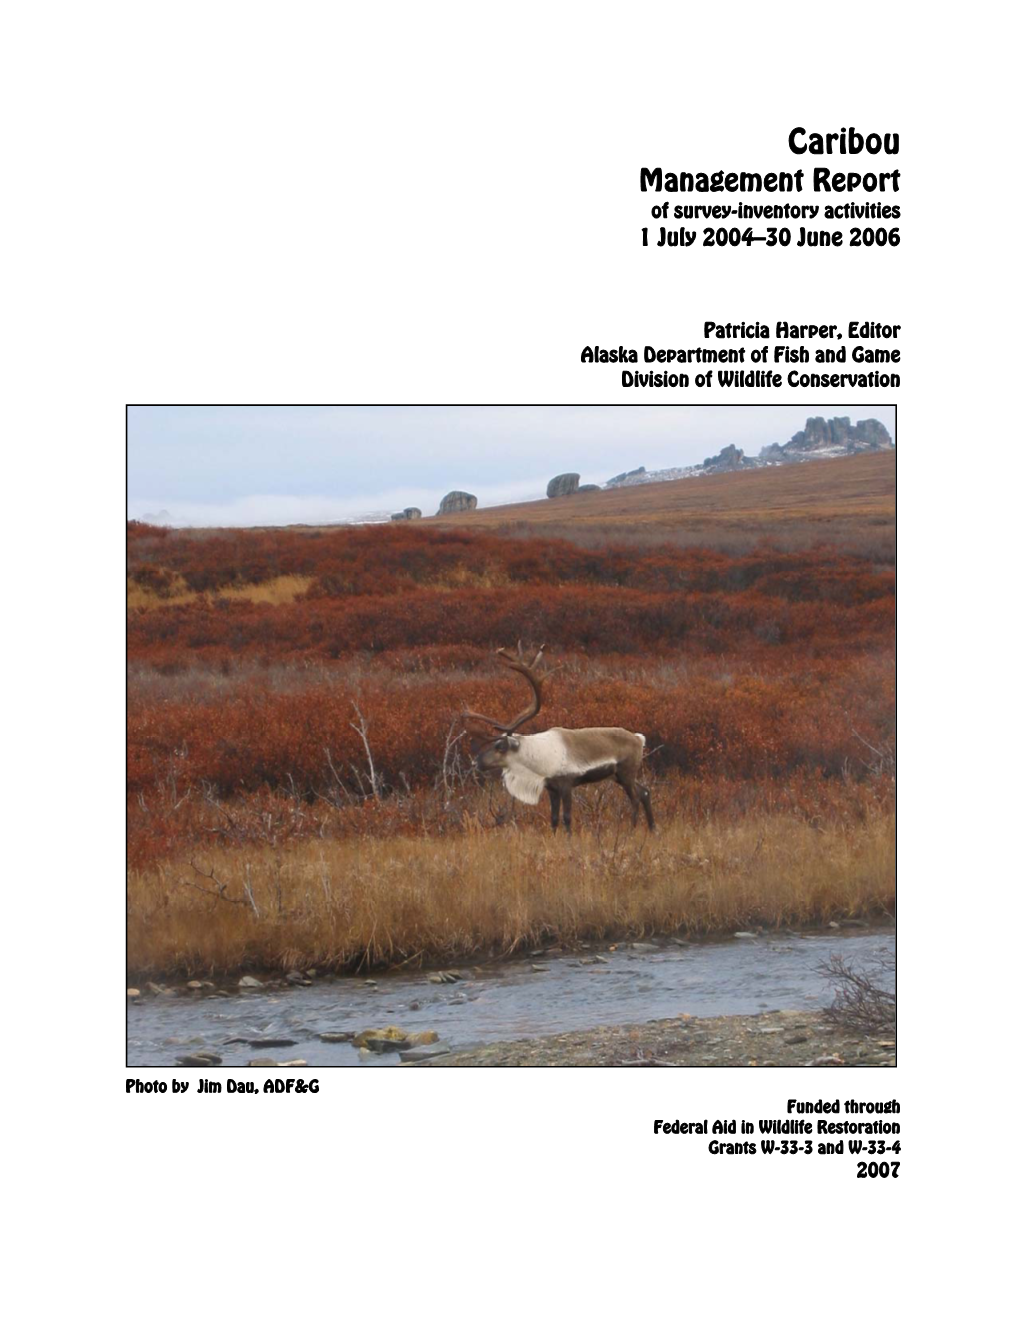 Caribou Management Report of Survey and Inventory Activities 1 July 2004–30 June 2006